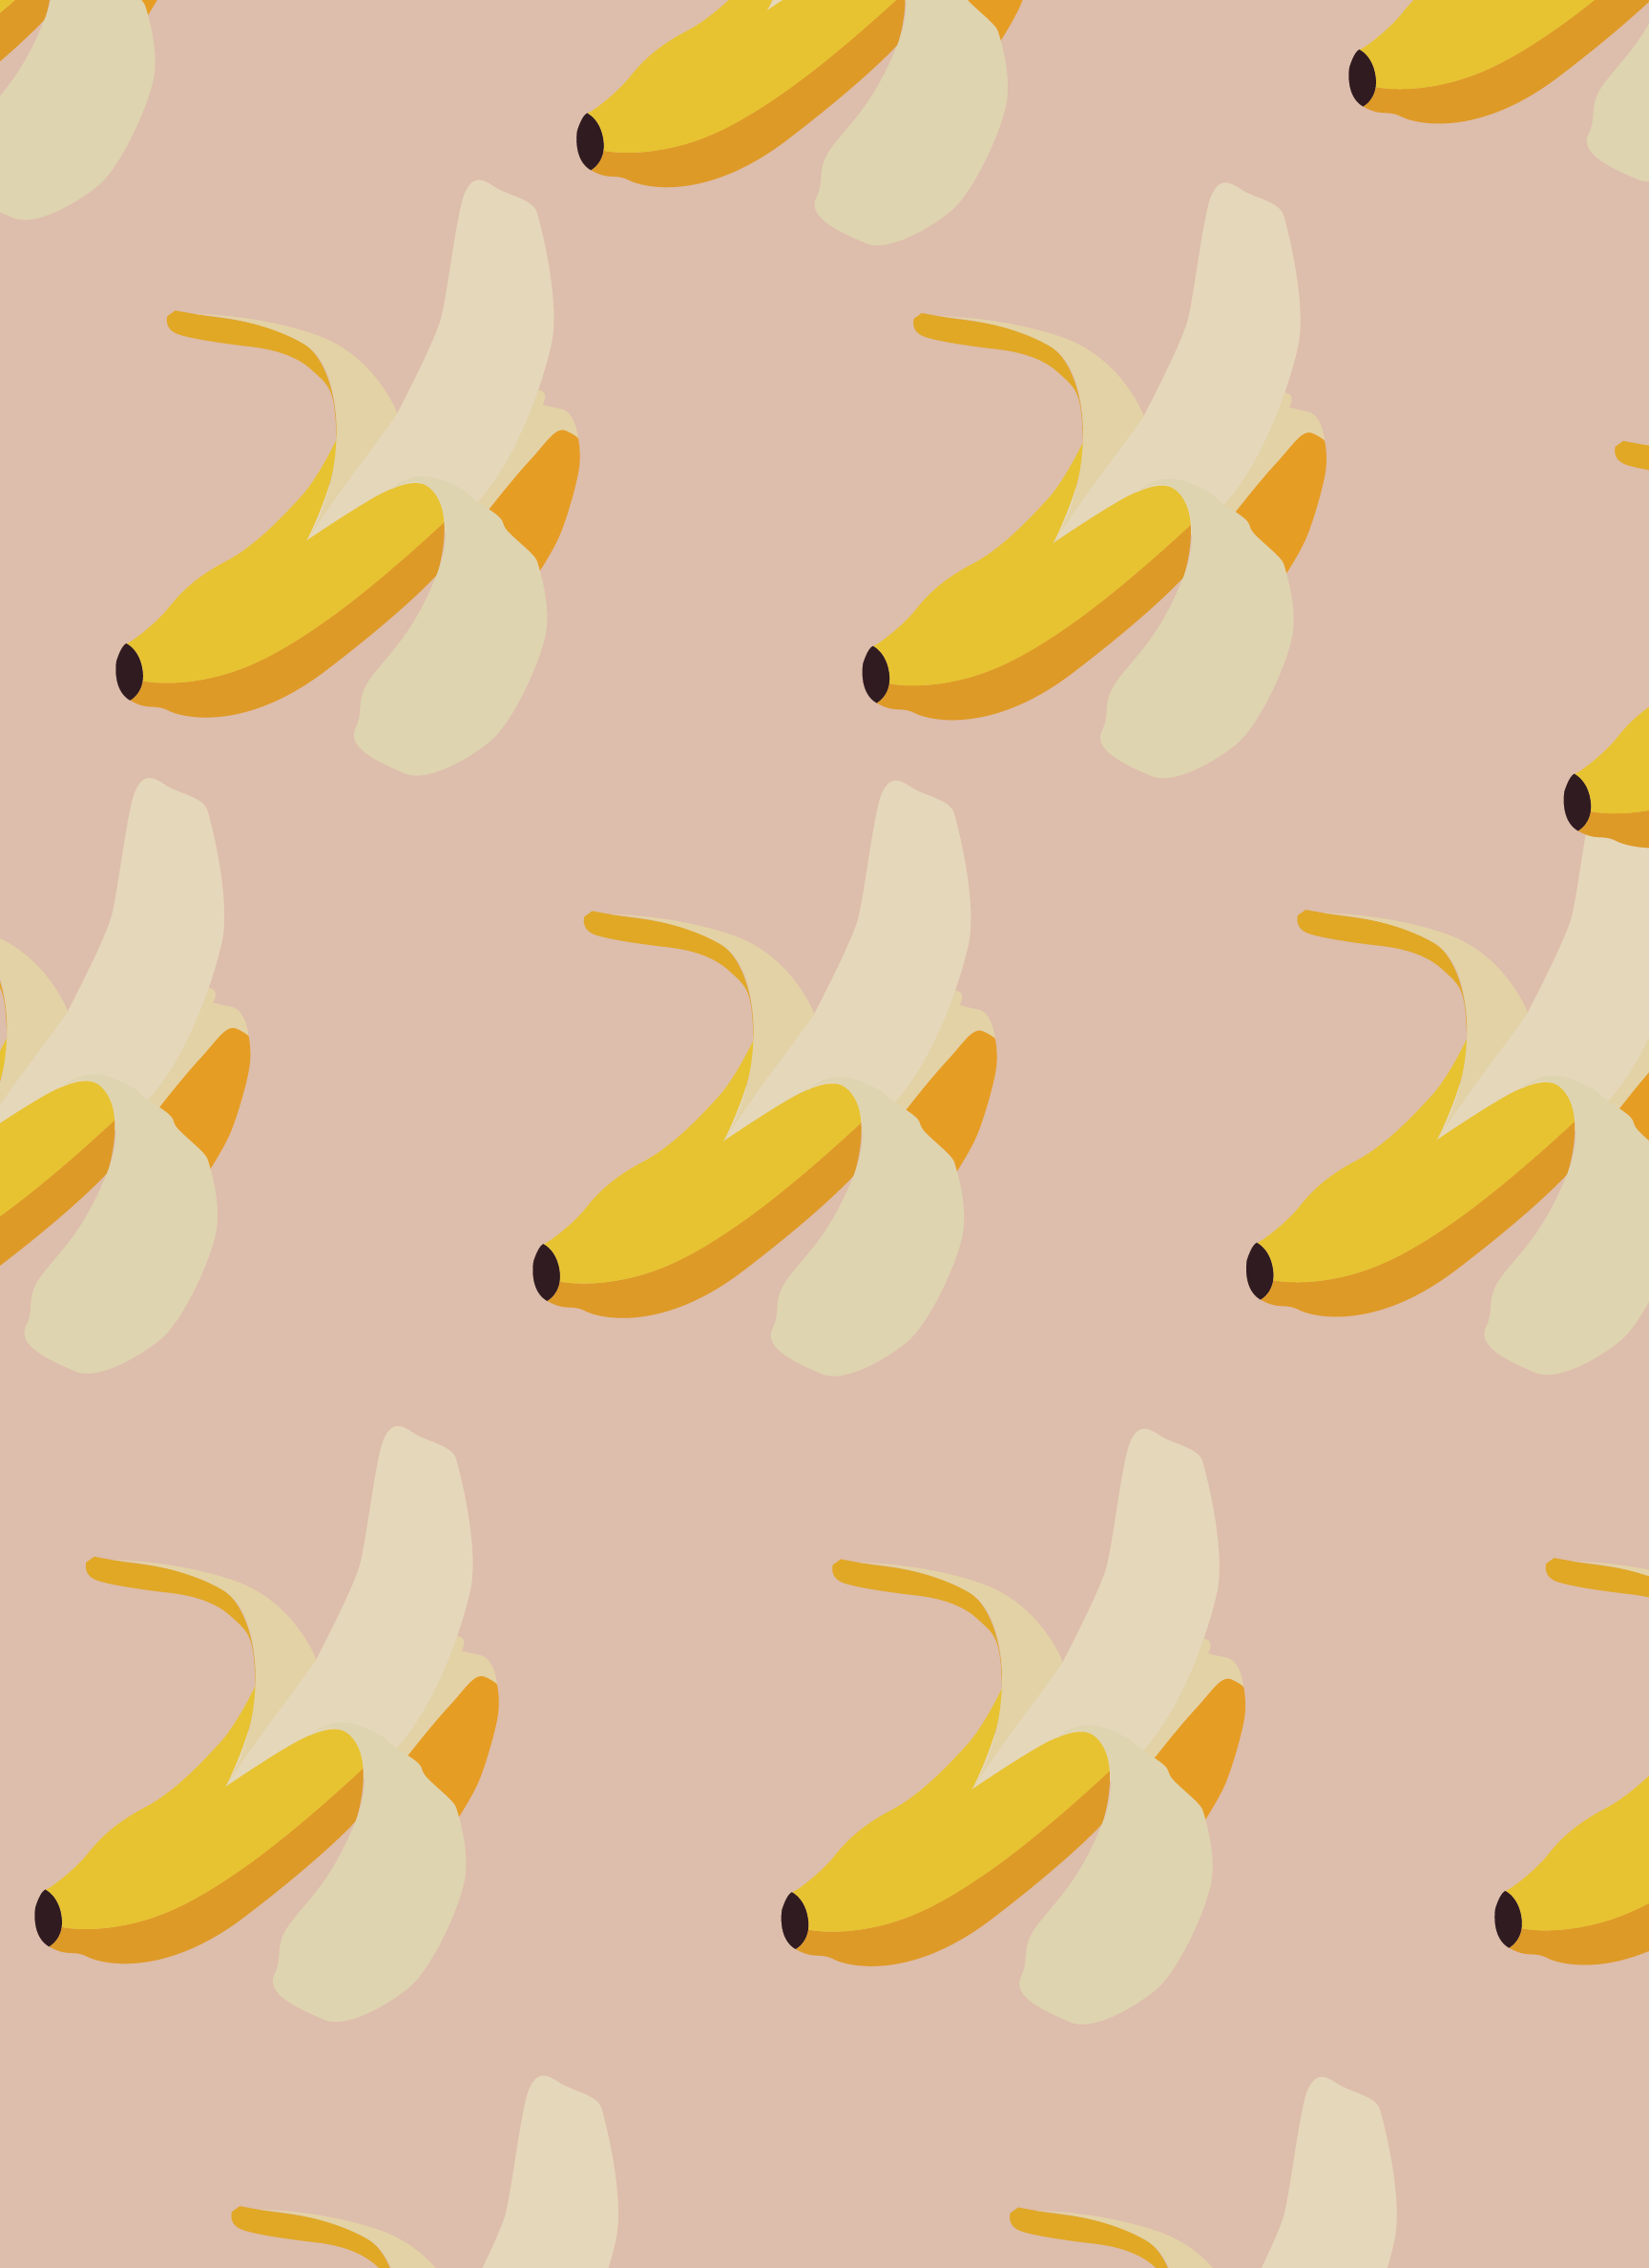 Funny Banana Fabric Wallpaper and Home Decor  Spoonflower